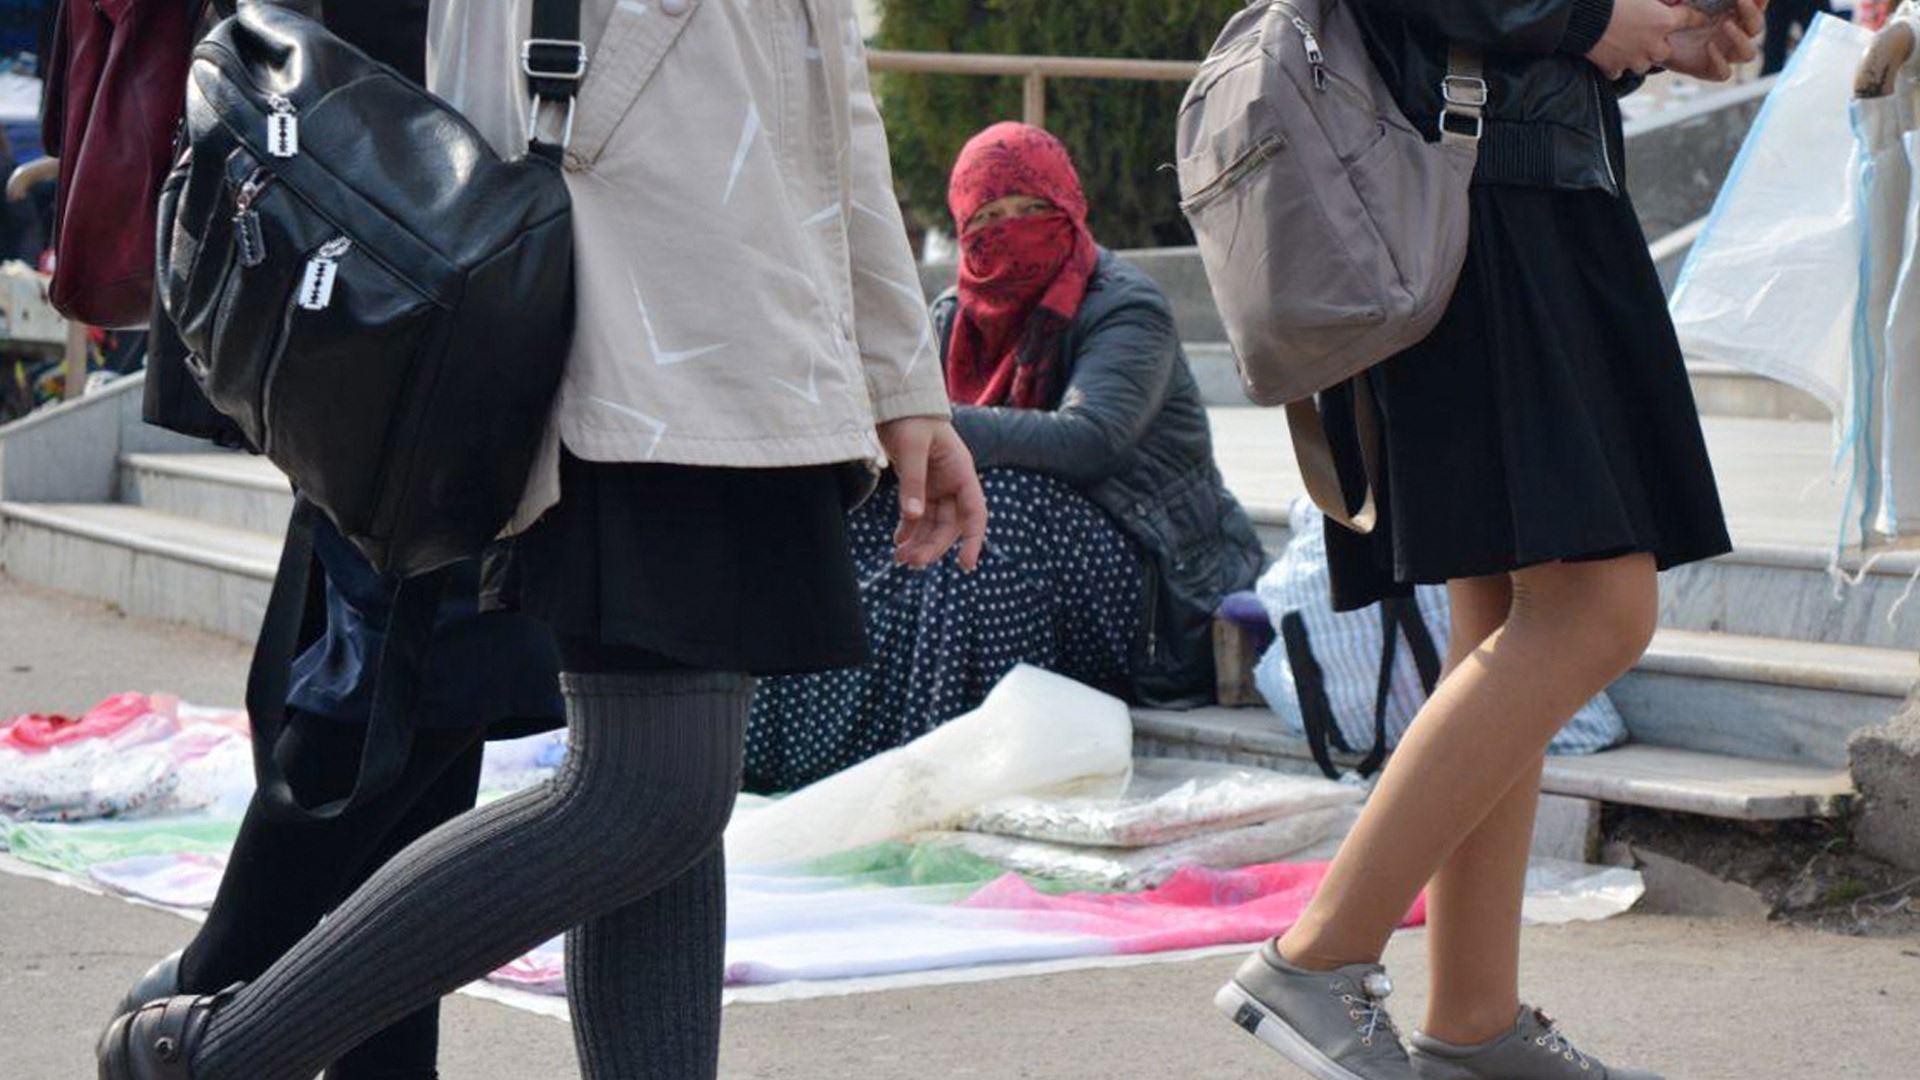 Young people walking past a hijab wearing woman sat on the ground